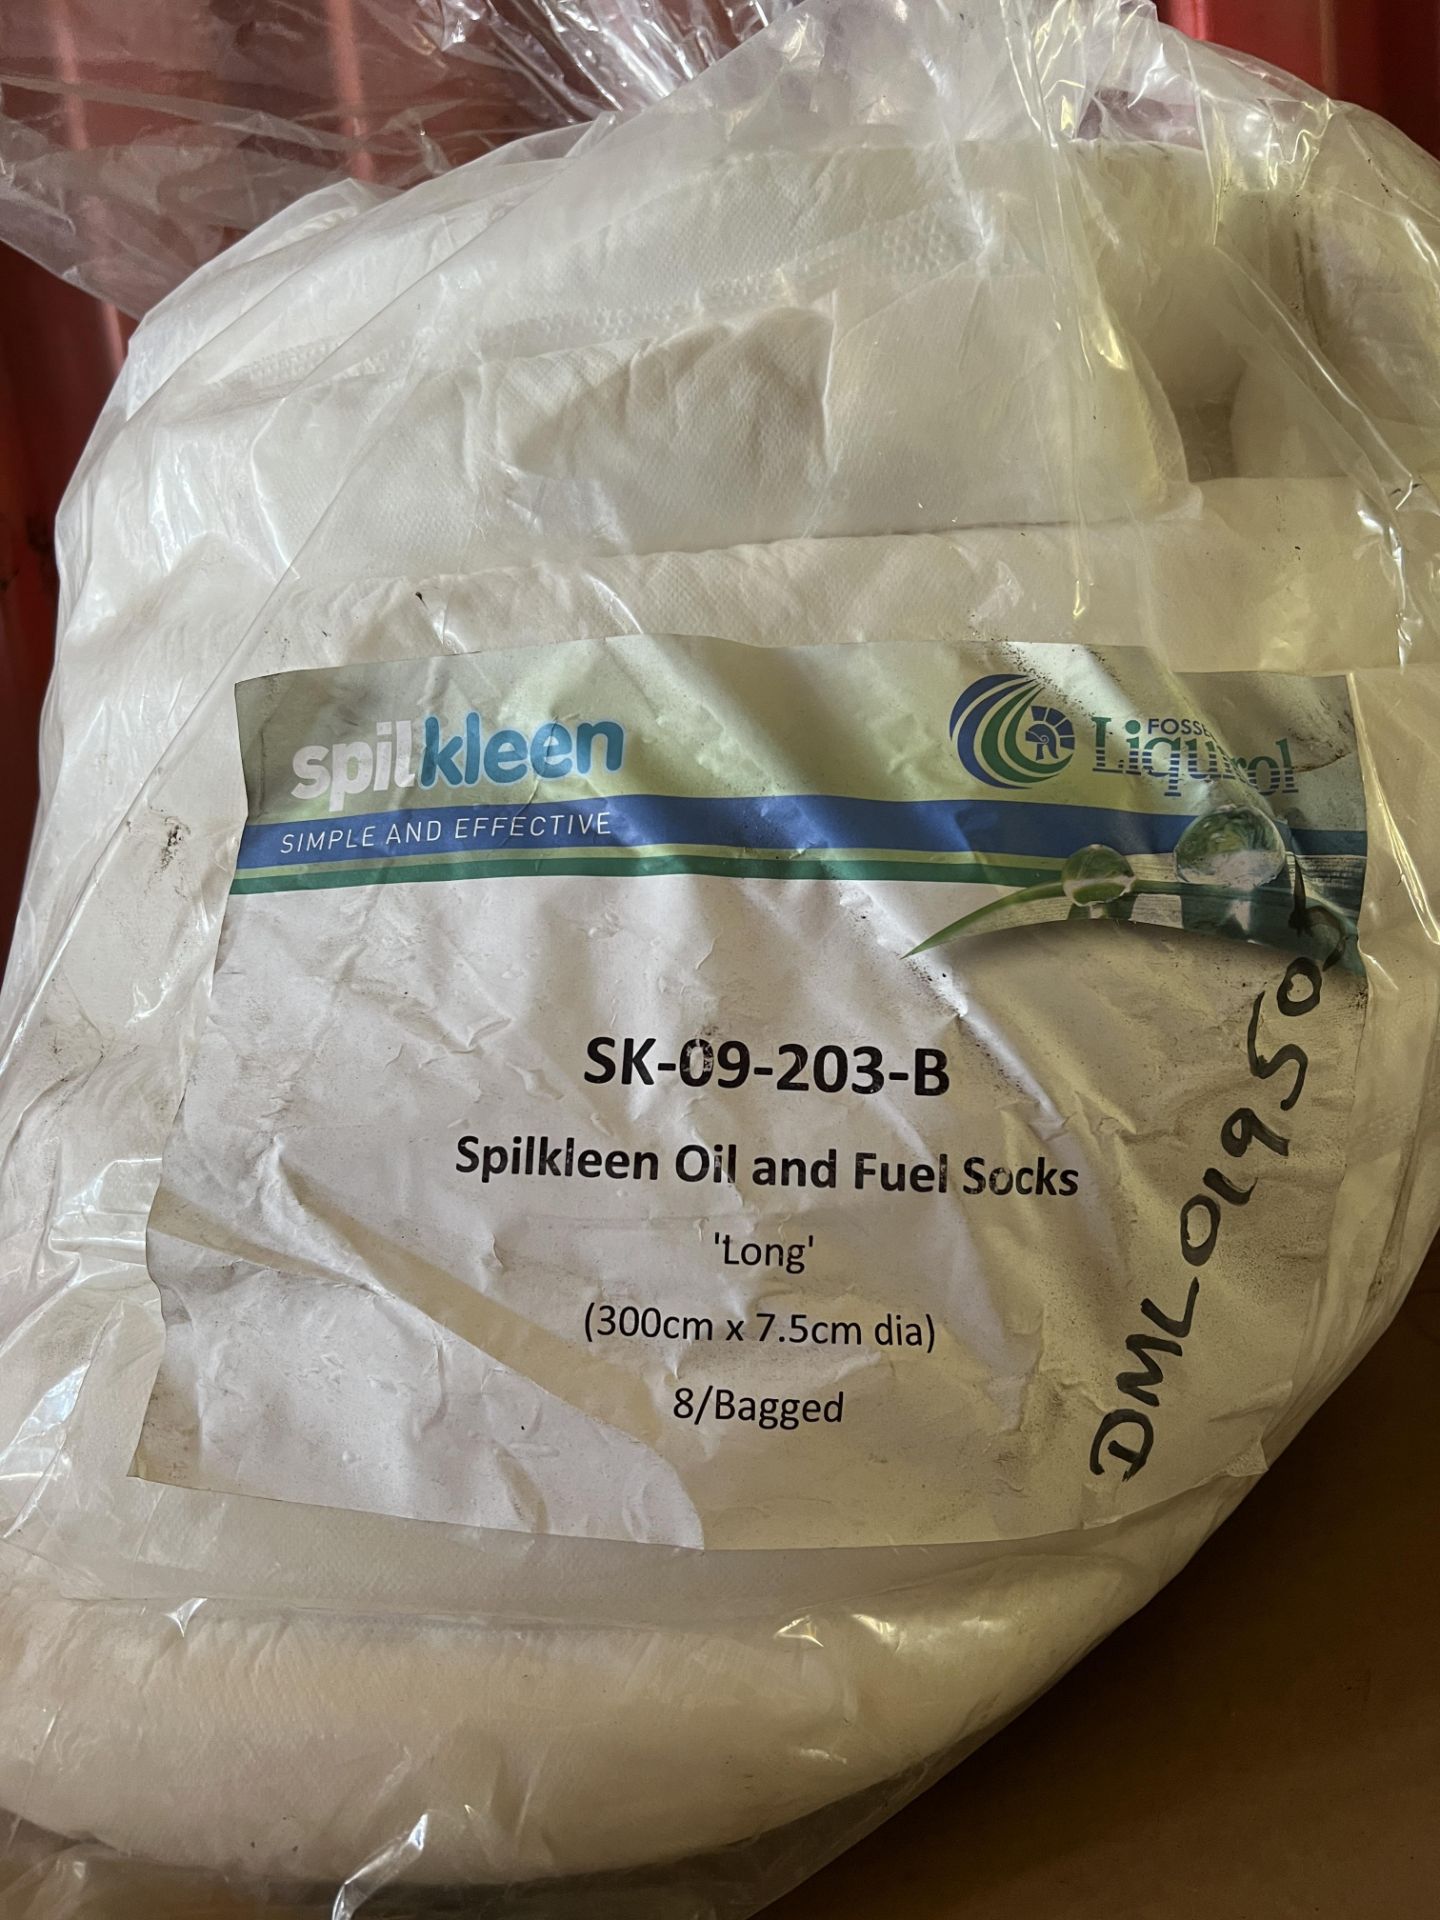 Oil and Fuel socks: Spilkleen, Size 300x 7.5cm, - Image 2 of 2